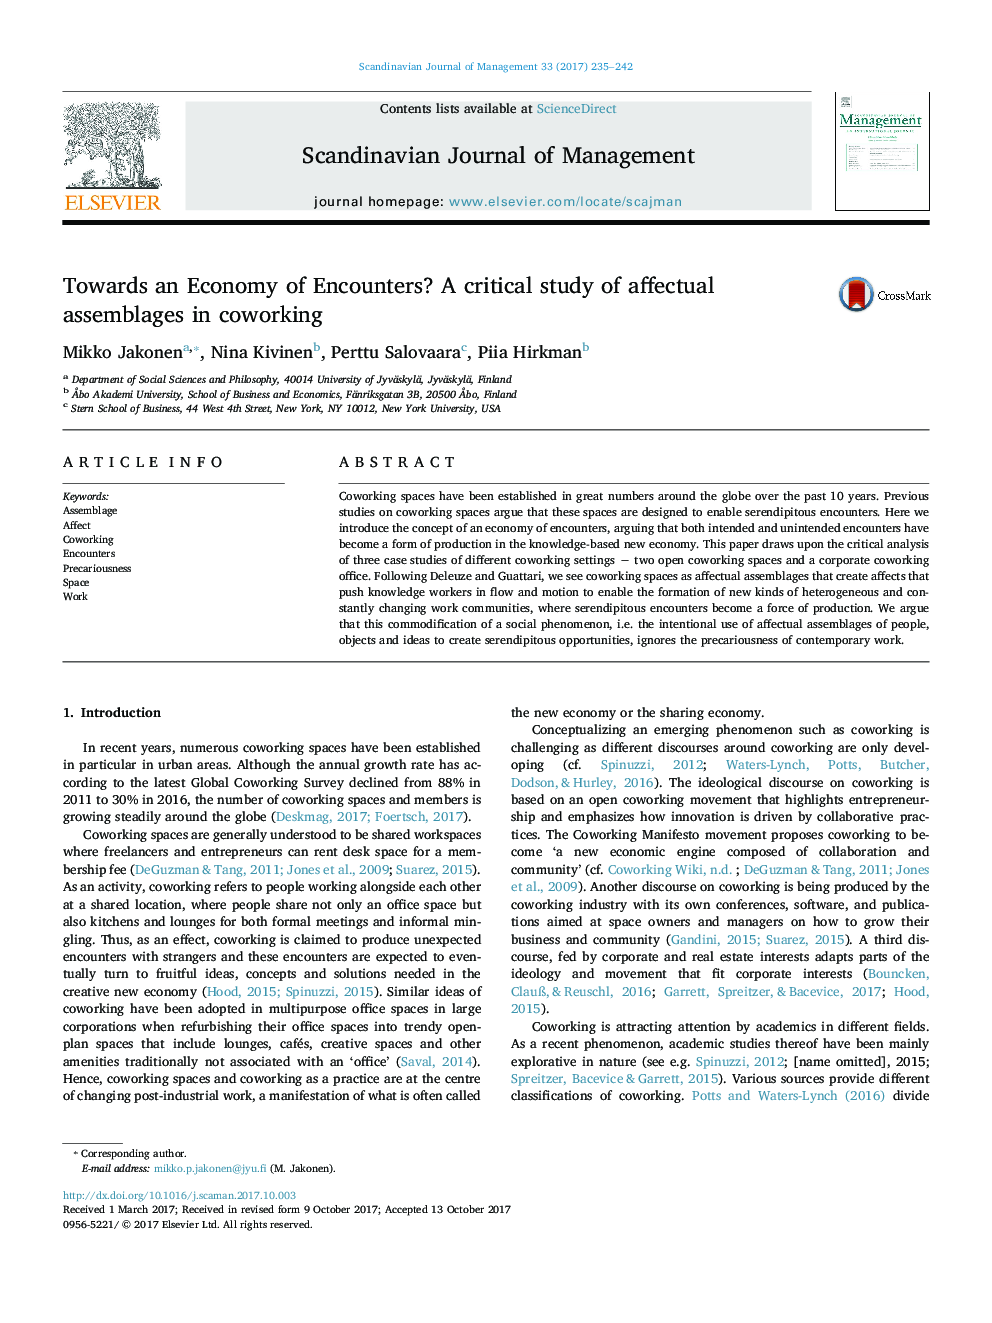 Towards an Economy of Encounters? A critical study of affectual assemblages in coworking